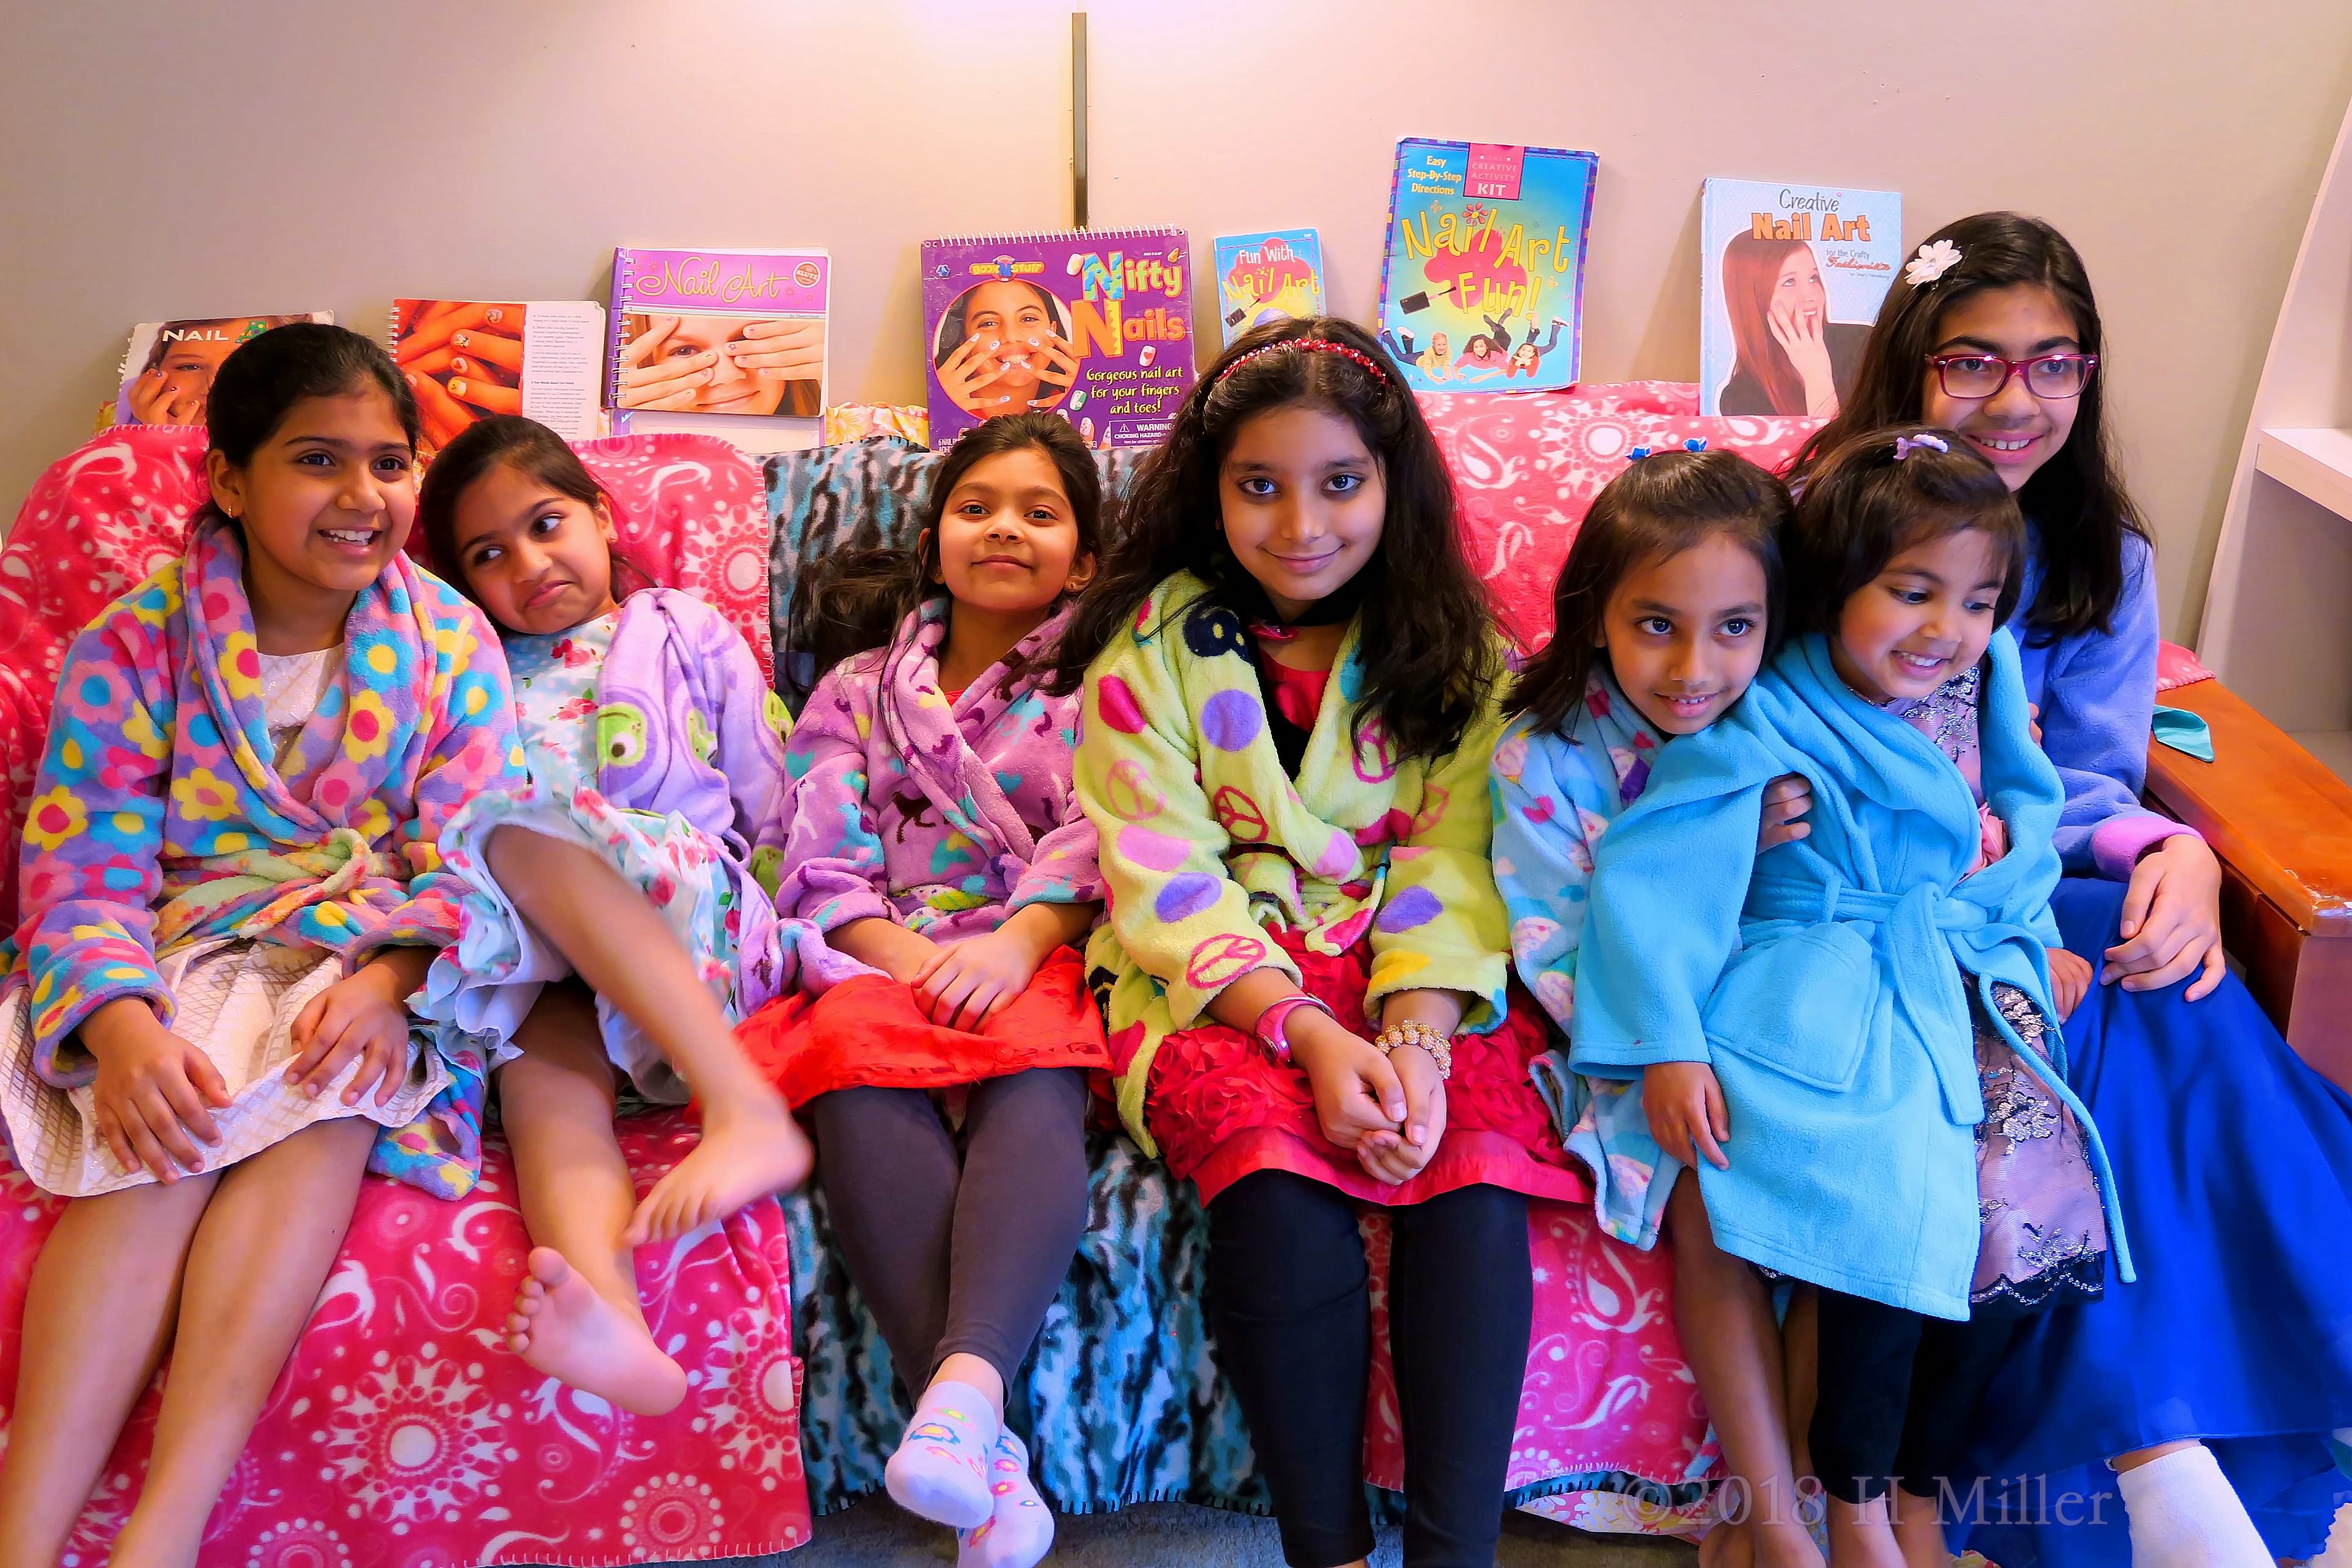 Everyone Is Ready For The Girls Spa With Their Colorful Spa Robes! 4